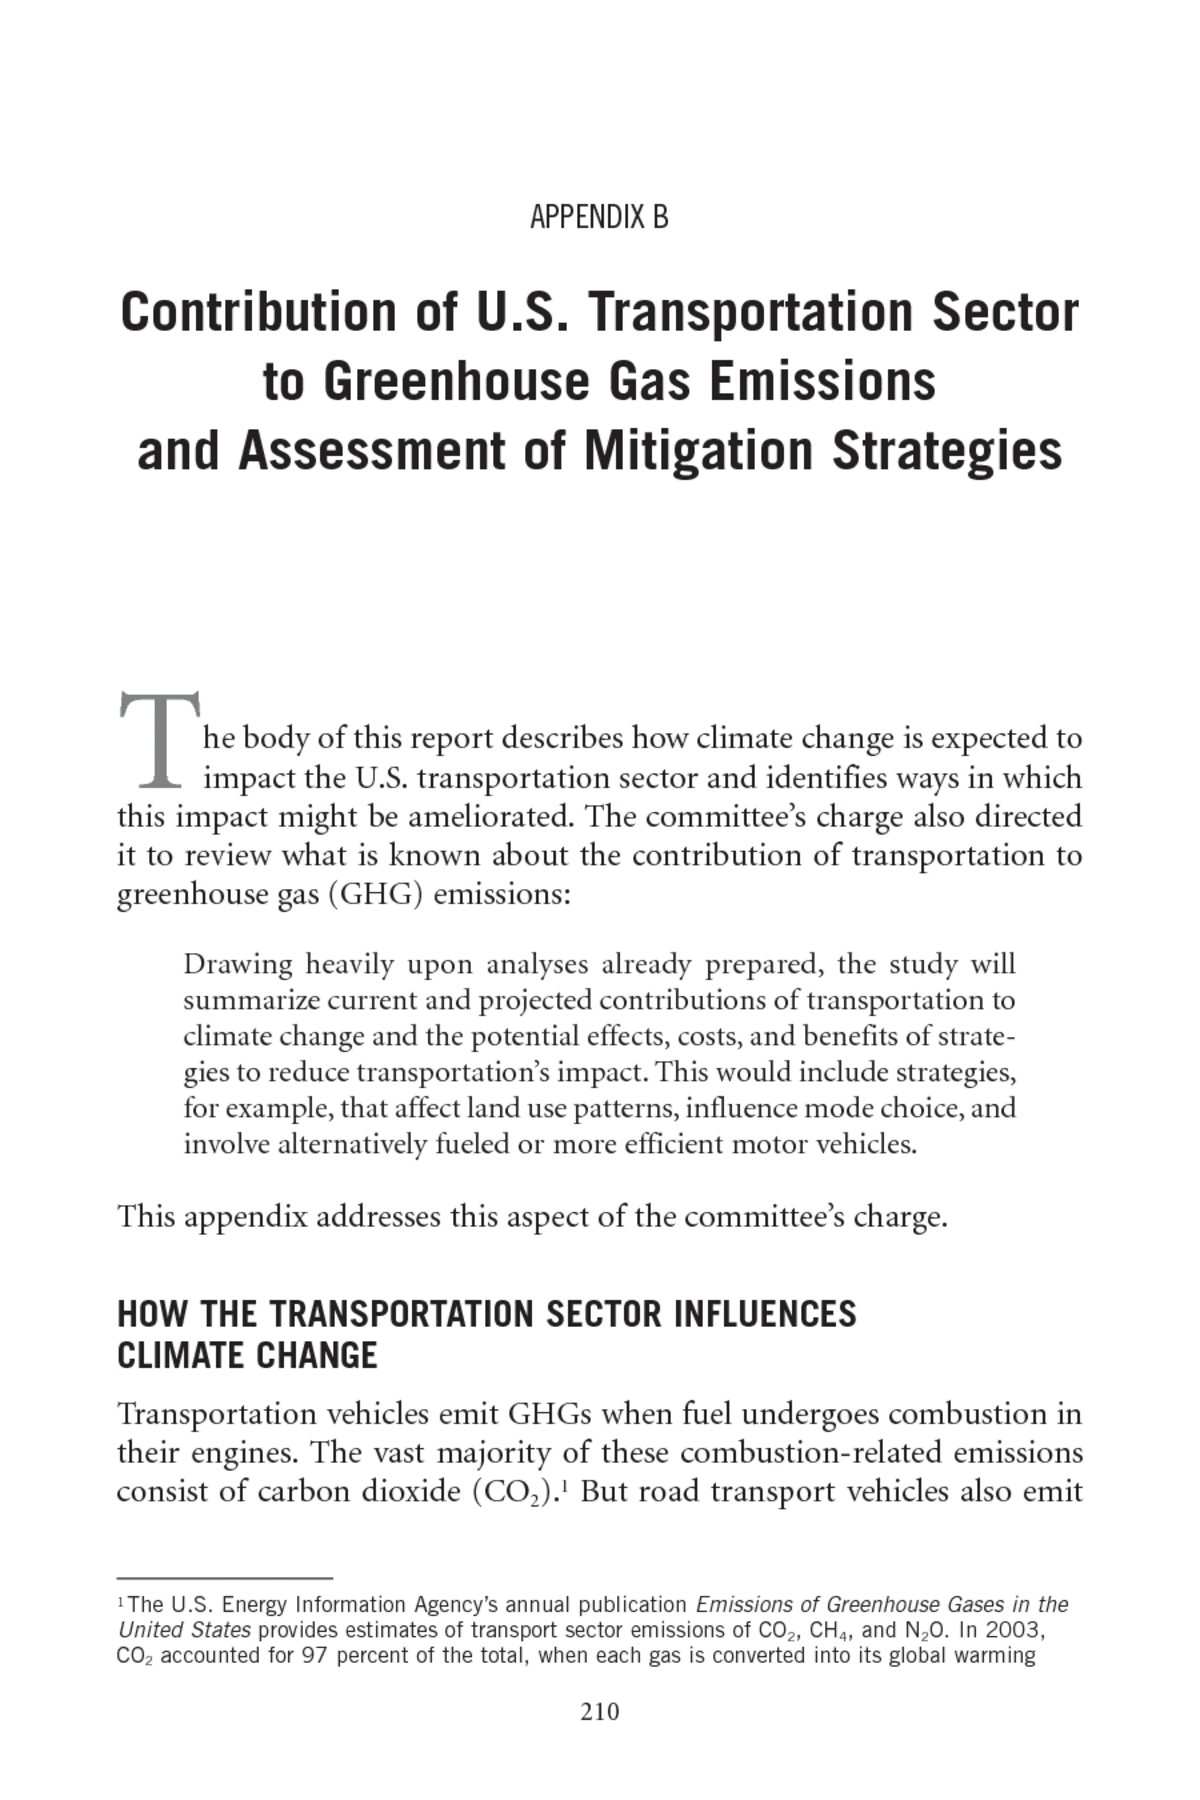 Contribution U.S. Transportation Sectorto Greenhouse Gas Emissionsand Assessment of Mitigation Strategies | Potential Impacts of Change on U.S. Transportation: Special Report 290 |The National Academies